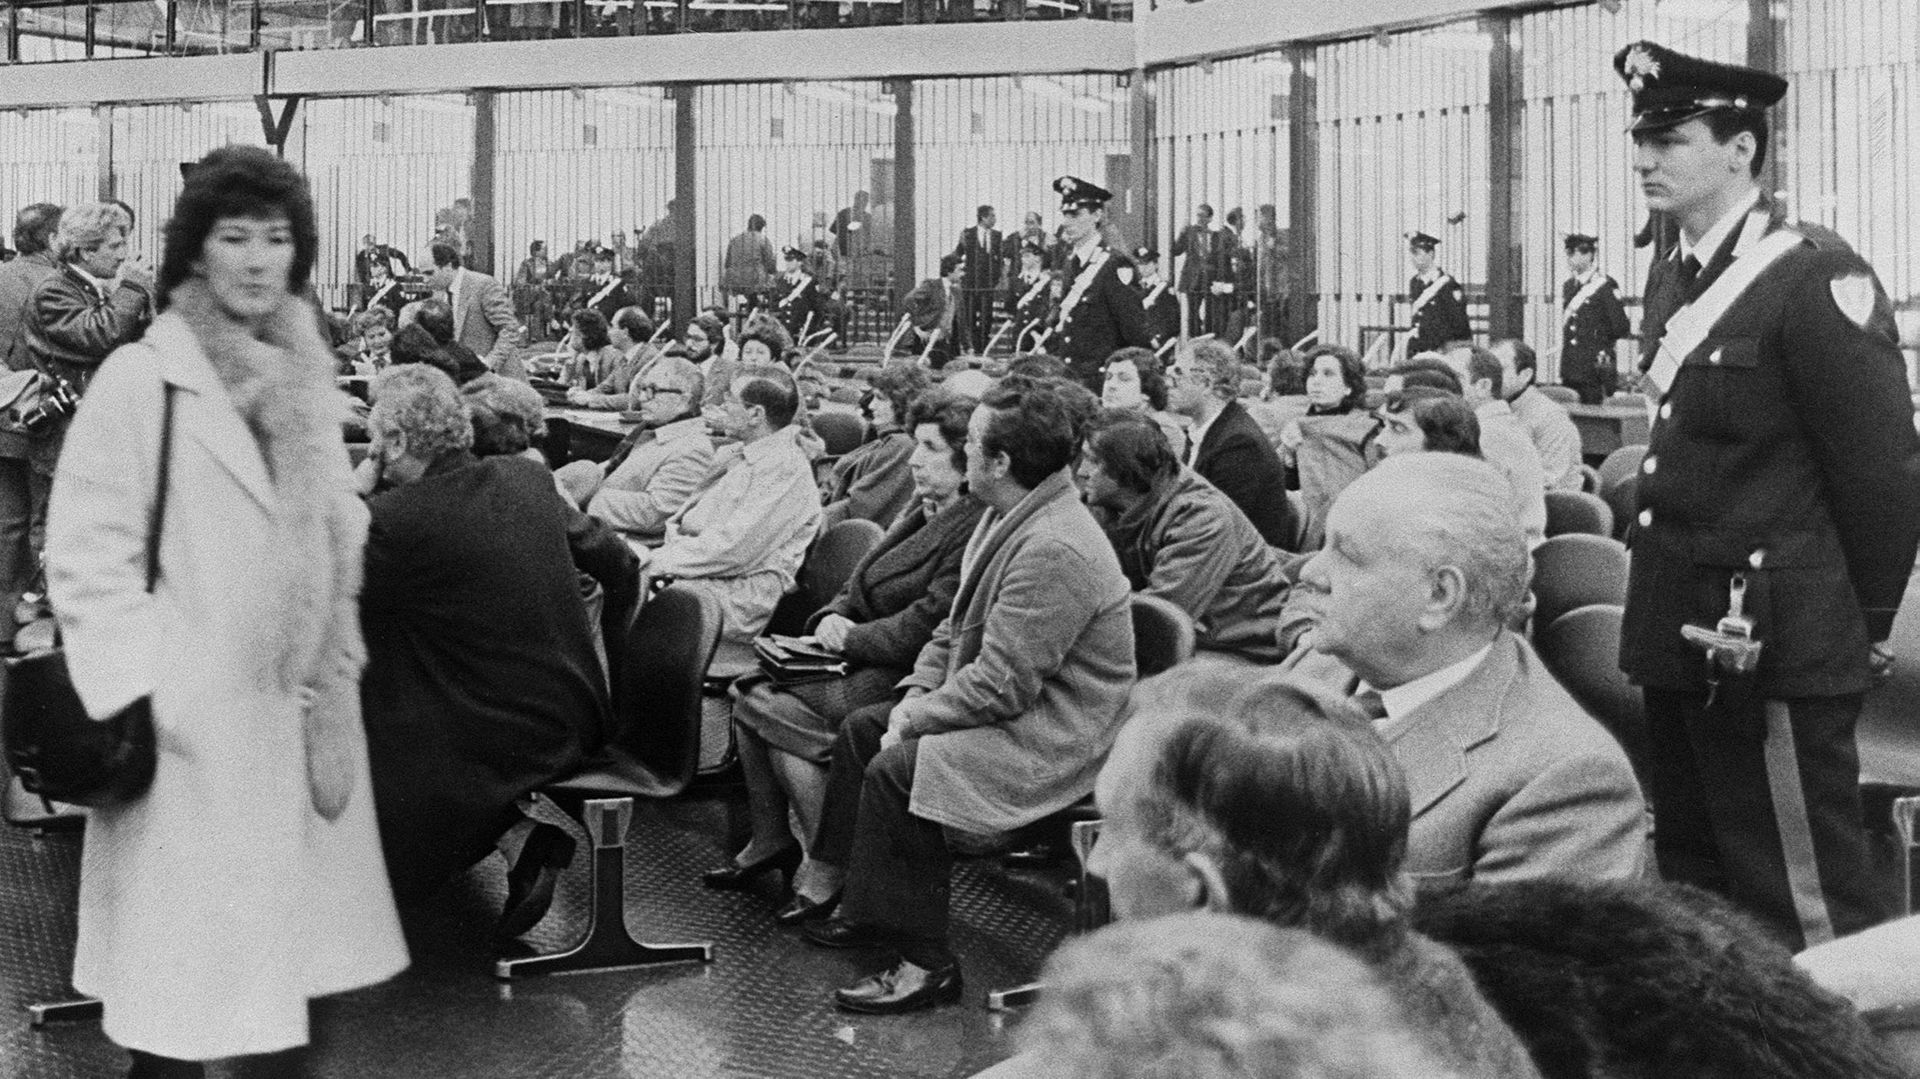 A picture taken 10 February 1986 shows the crowd in the courtroom inside the bunker built into the Ucciardone prison in Palermo as the big trial against 474 people accused of Mafia activity started in Sicilia. The accused men are locked in the steel cages